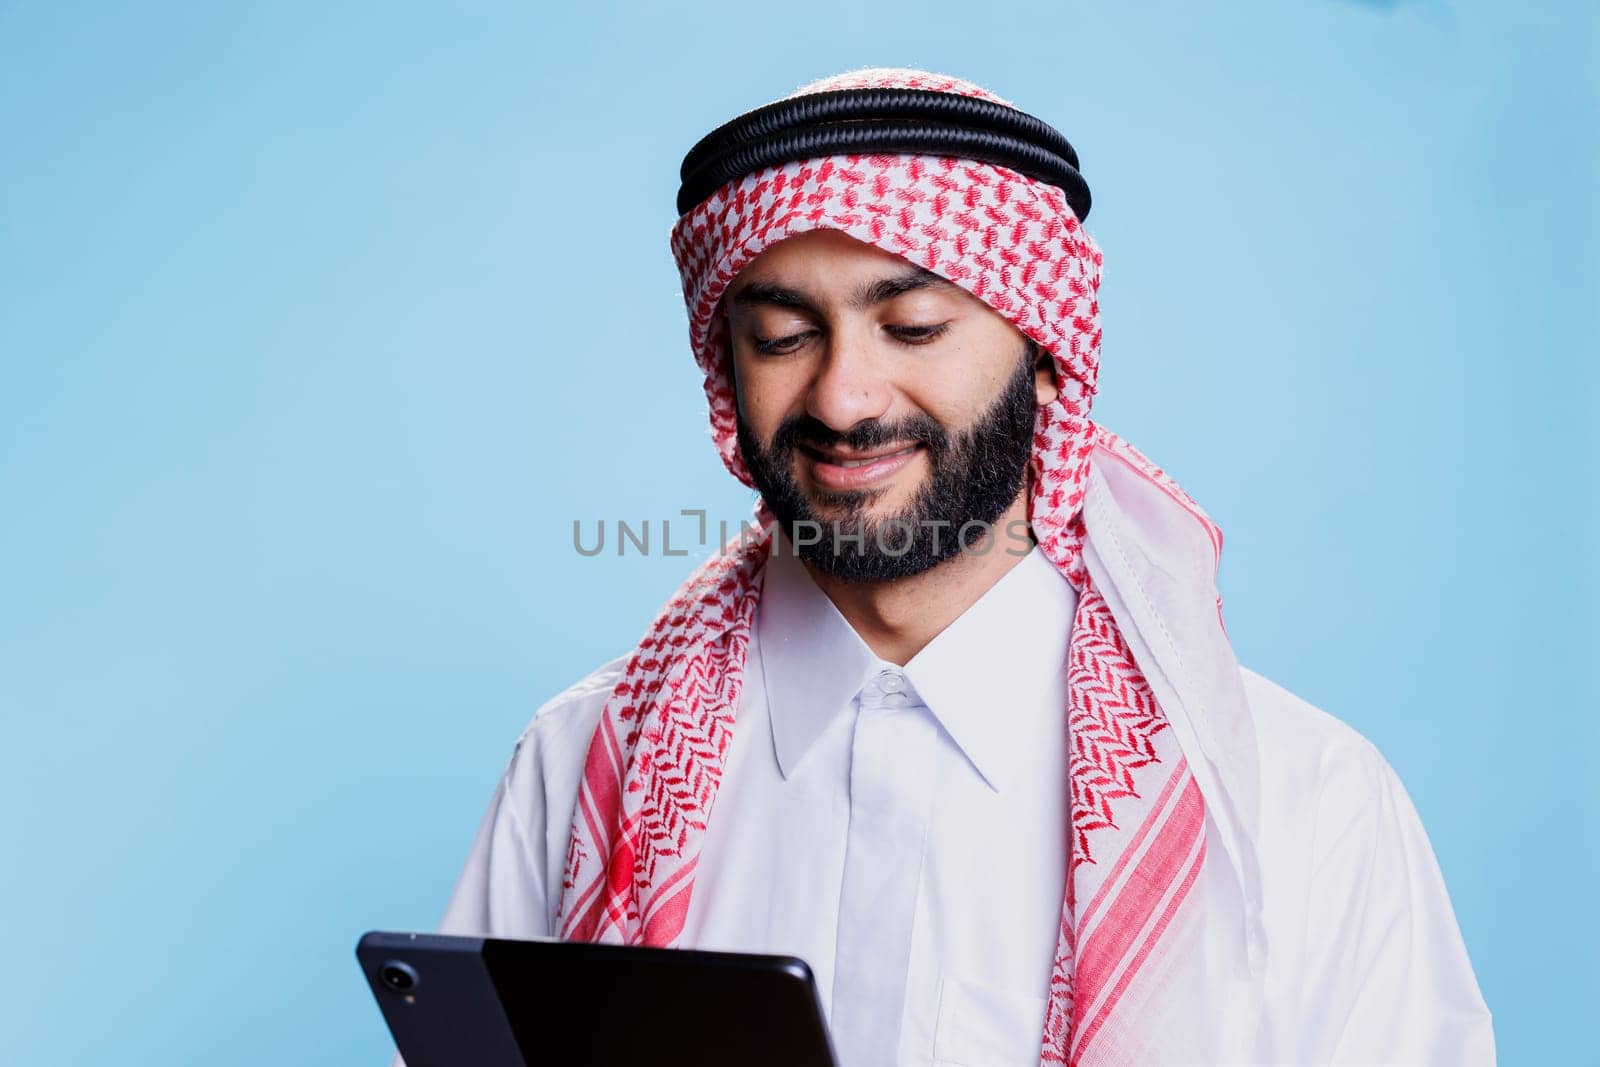 Smiling man wearing arabic clothes using digital tablet and scrolling social media. Cheerful muslim person dressed in ghutra headscarf and thobe tapping on portable device screen